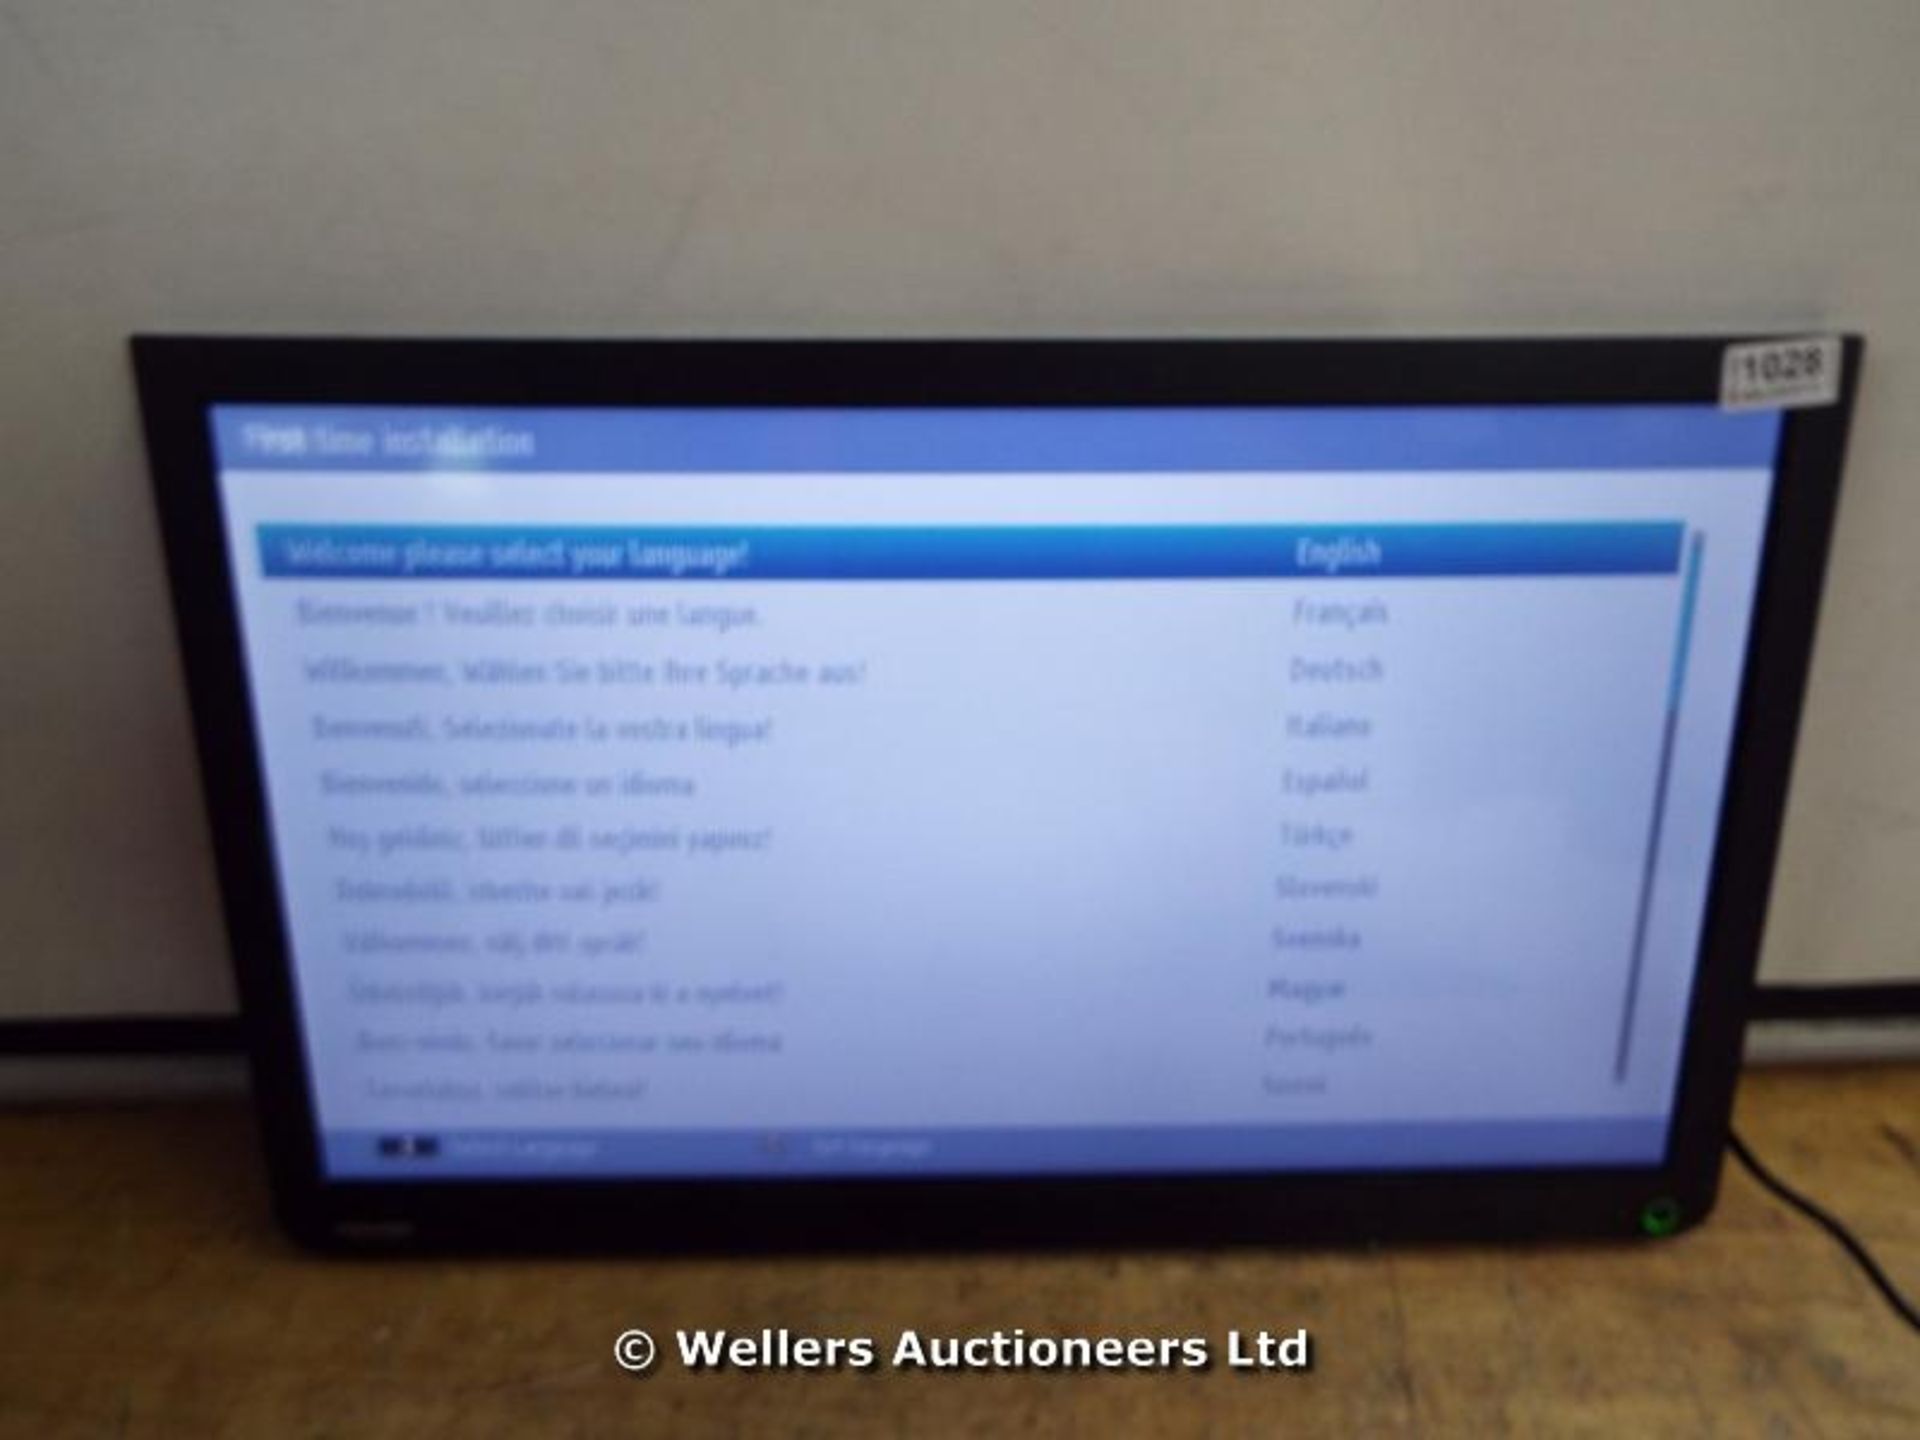 *"TOSHIBA 24W1333B 24" HD LED TV / POWER / PICTURE / NO REMOTE / WITH STAND / ORIGINAL BOX (4054902)